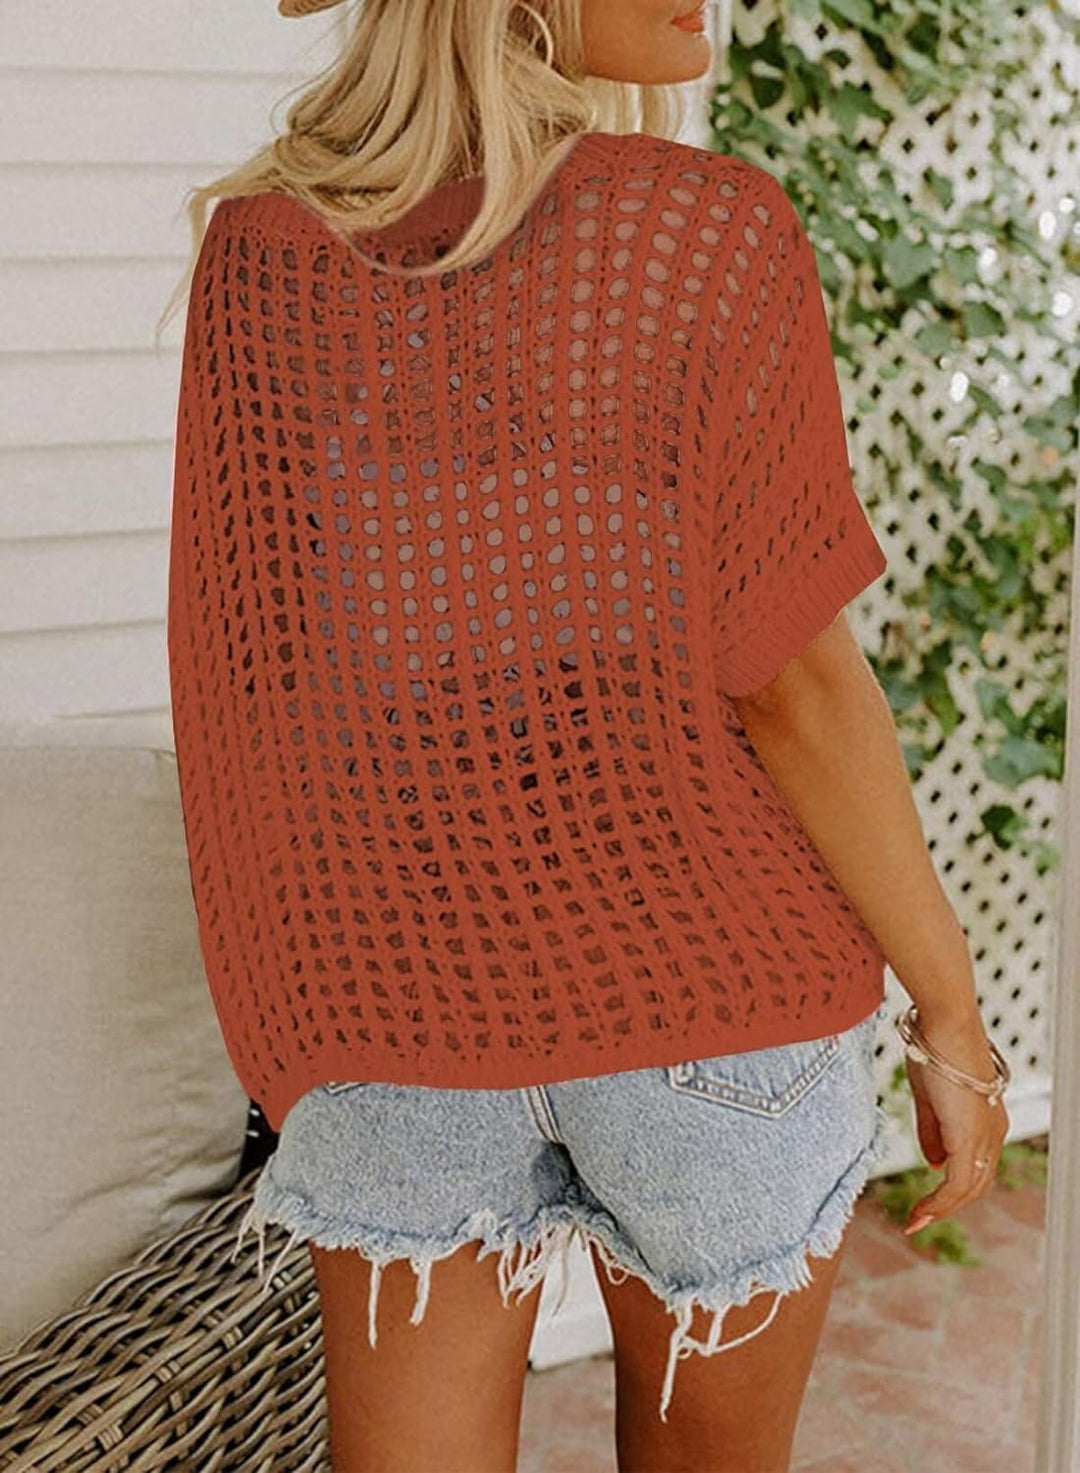 Womens Summer Scoop Neck Short Sleeve Sweater Casual Crochet Hollow Out Knit Tops Pullover Shirts Beach Coverup